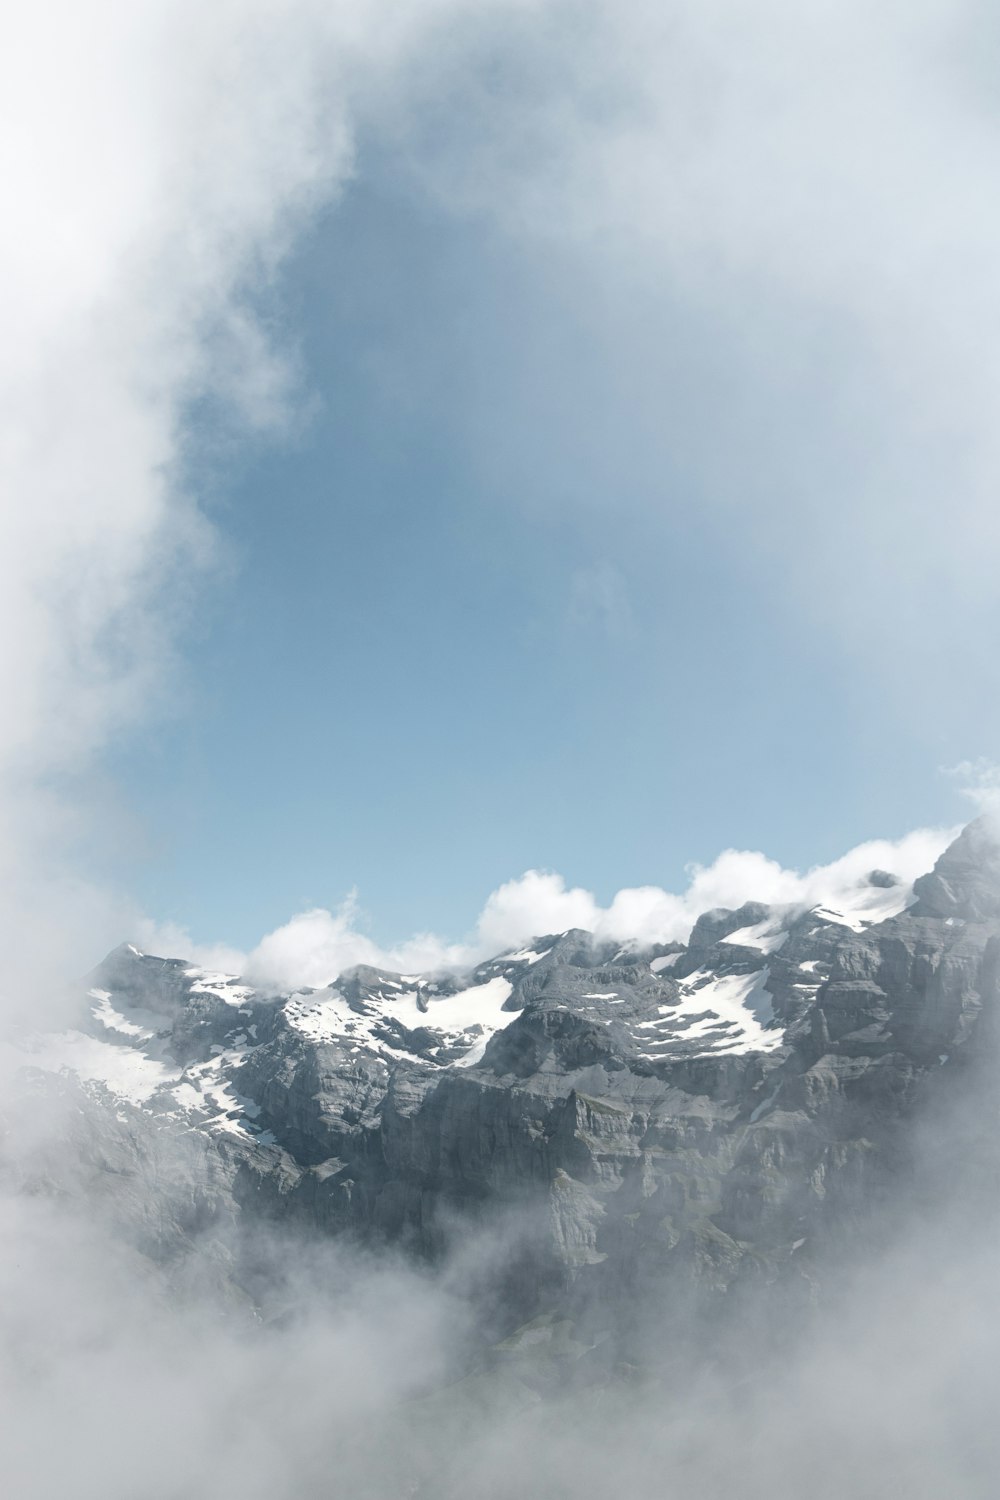 a view of a mountain range with clouds in the foreground